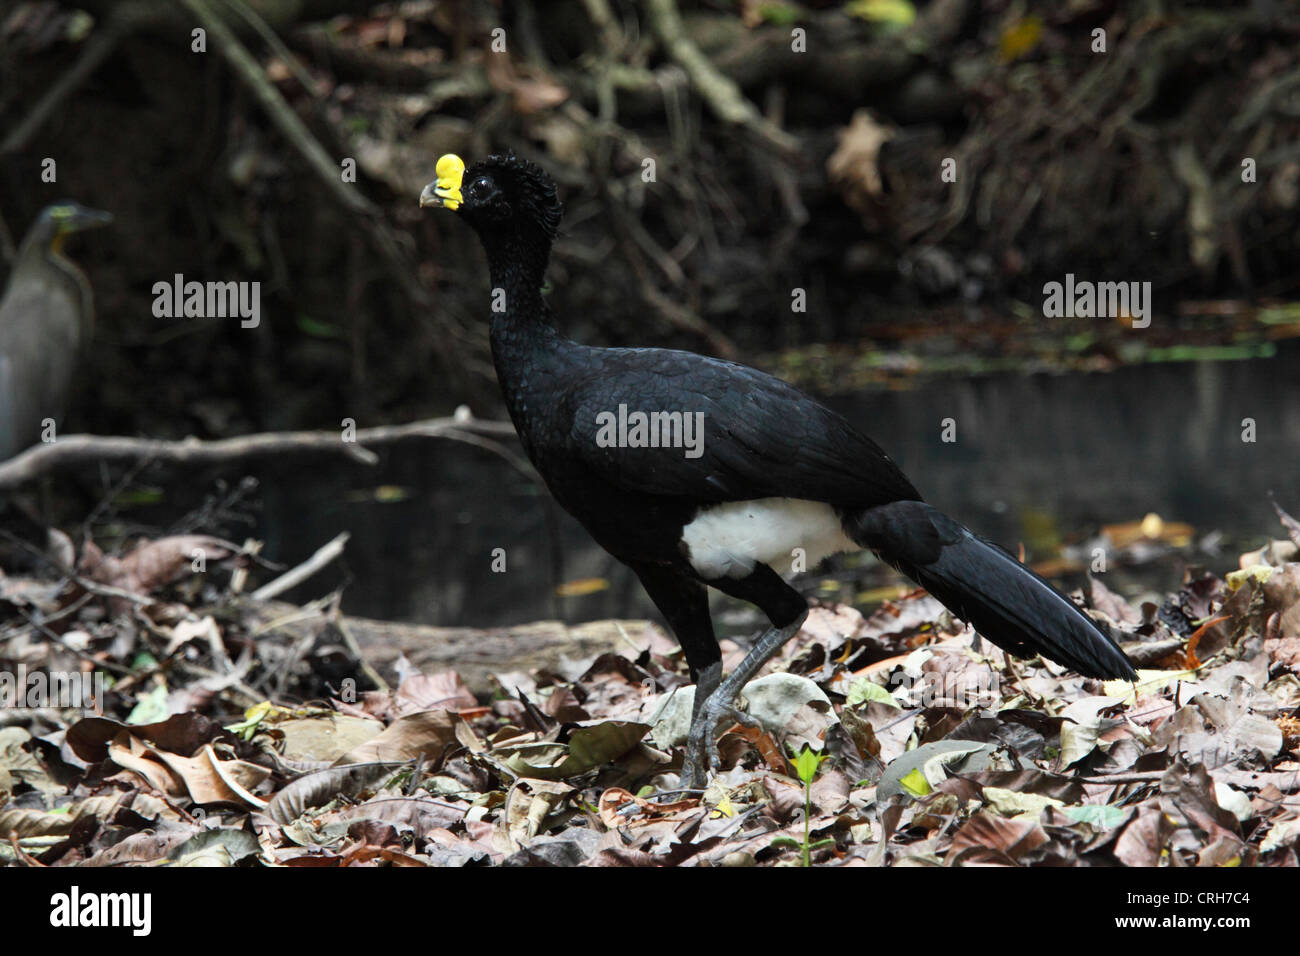 Male Great Curassow (Crax rubra) in rainforest. Corcovado National Park; Osa Peninsula; Costa Rica. March 2012. Stock Photo